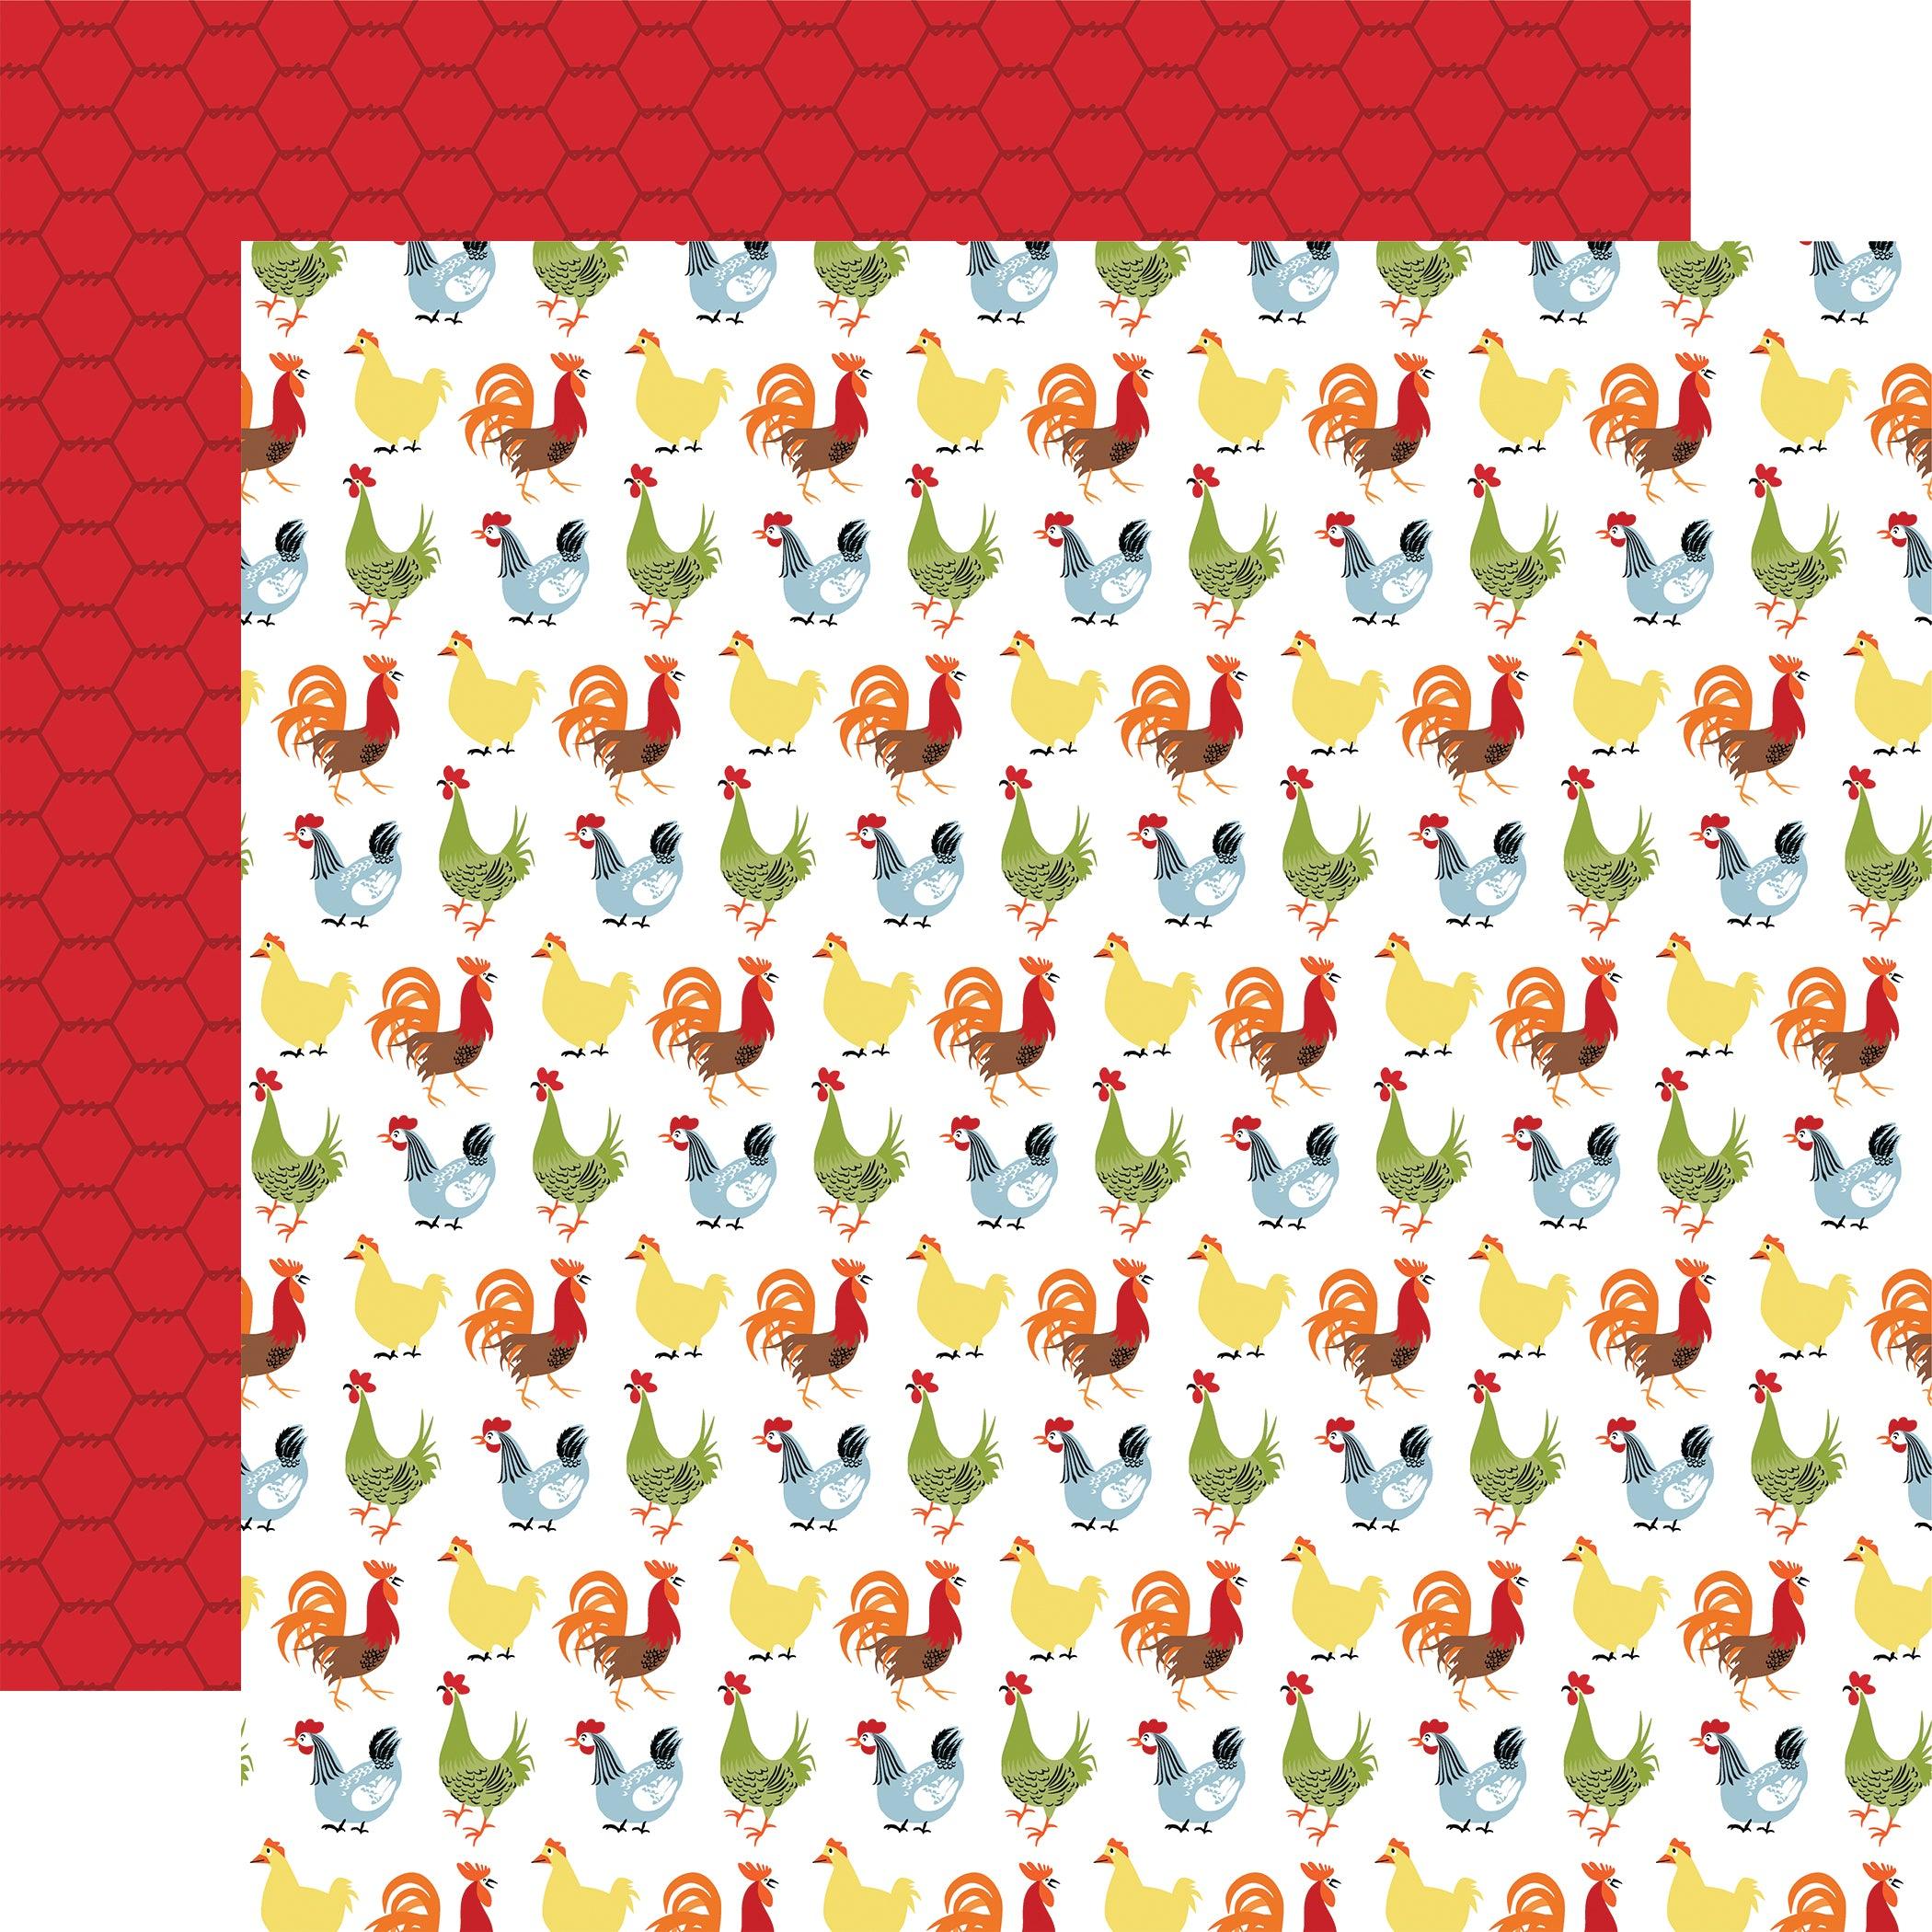 Farmhouse Living Collection Crazy Chickens 12 x 12 Double-Sided Scrapbook Paper by Carta Bella - Scrapbook Supply Companies